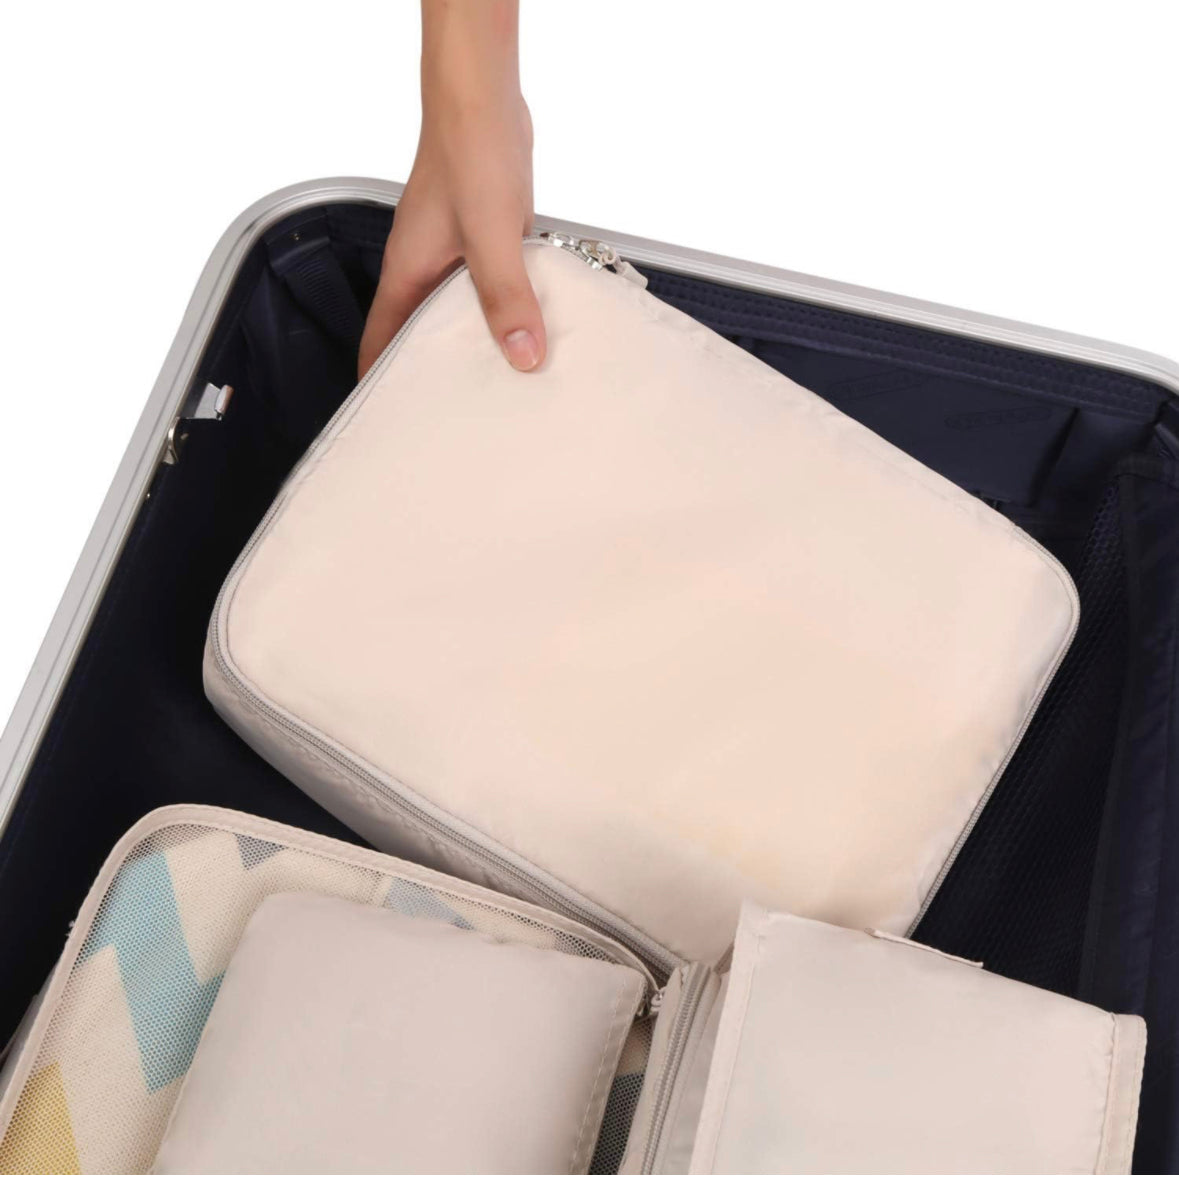 BAGAIL 8 Set Packing Cubes Luggage Packing Organizers for Travel Accessories.